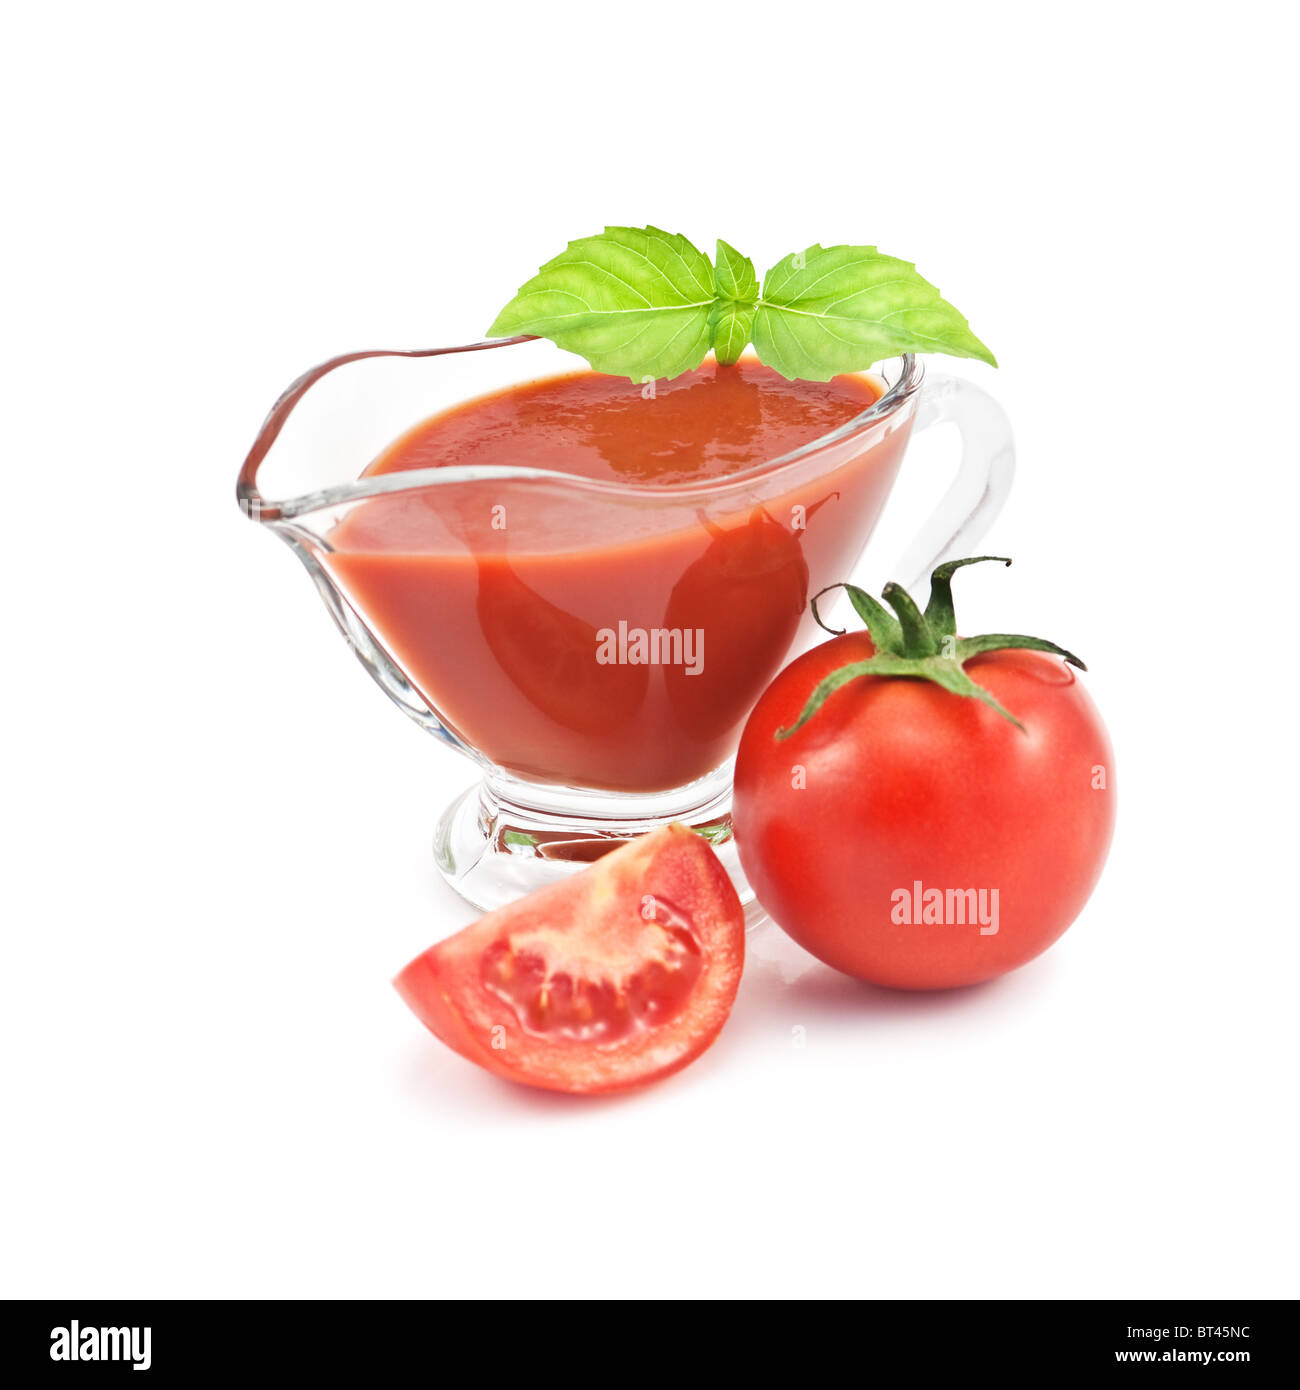 Sauce tomate isolated on white Banque D'Images